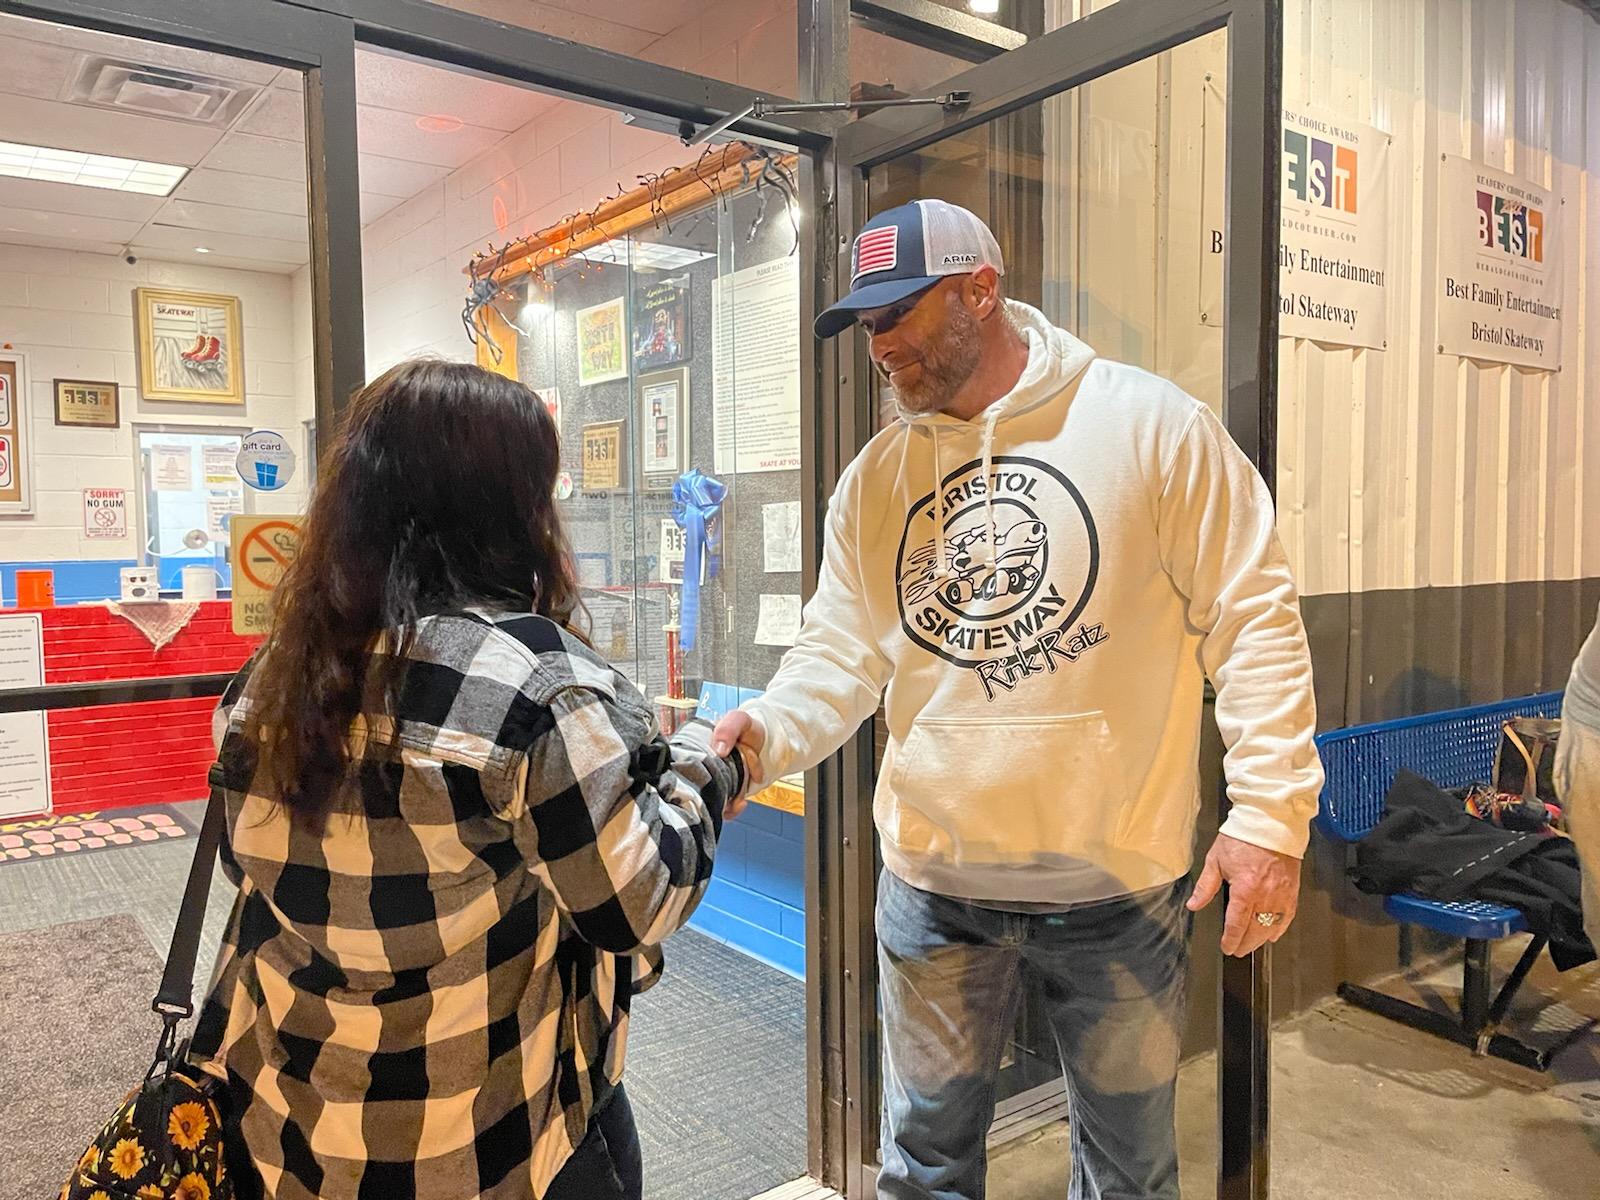 Teen in a plaid jacket being greeted by a man in a hooded sweatshirt outside a roller skating rink